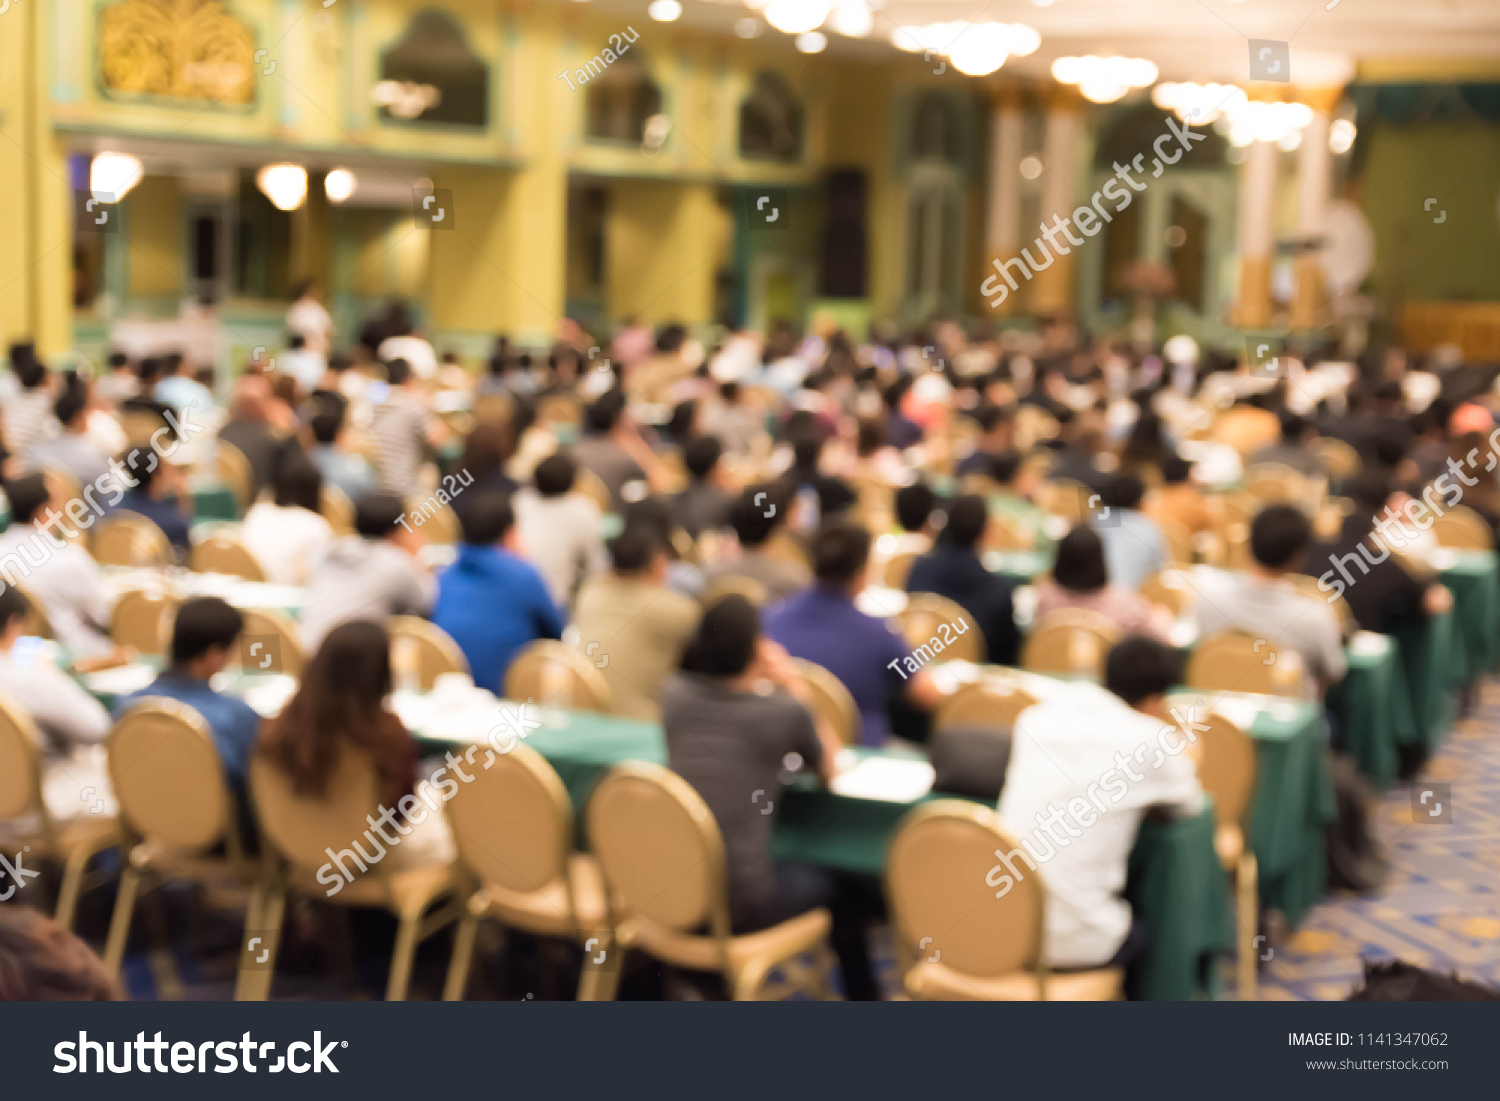 Abstract blurred photo background of business people in conference hall or seminar room.
Bokeh business meeting conference training learning coaching concept. #1141347062